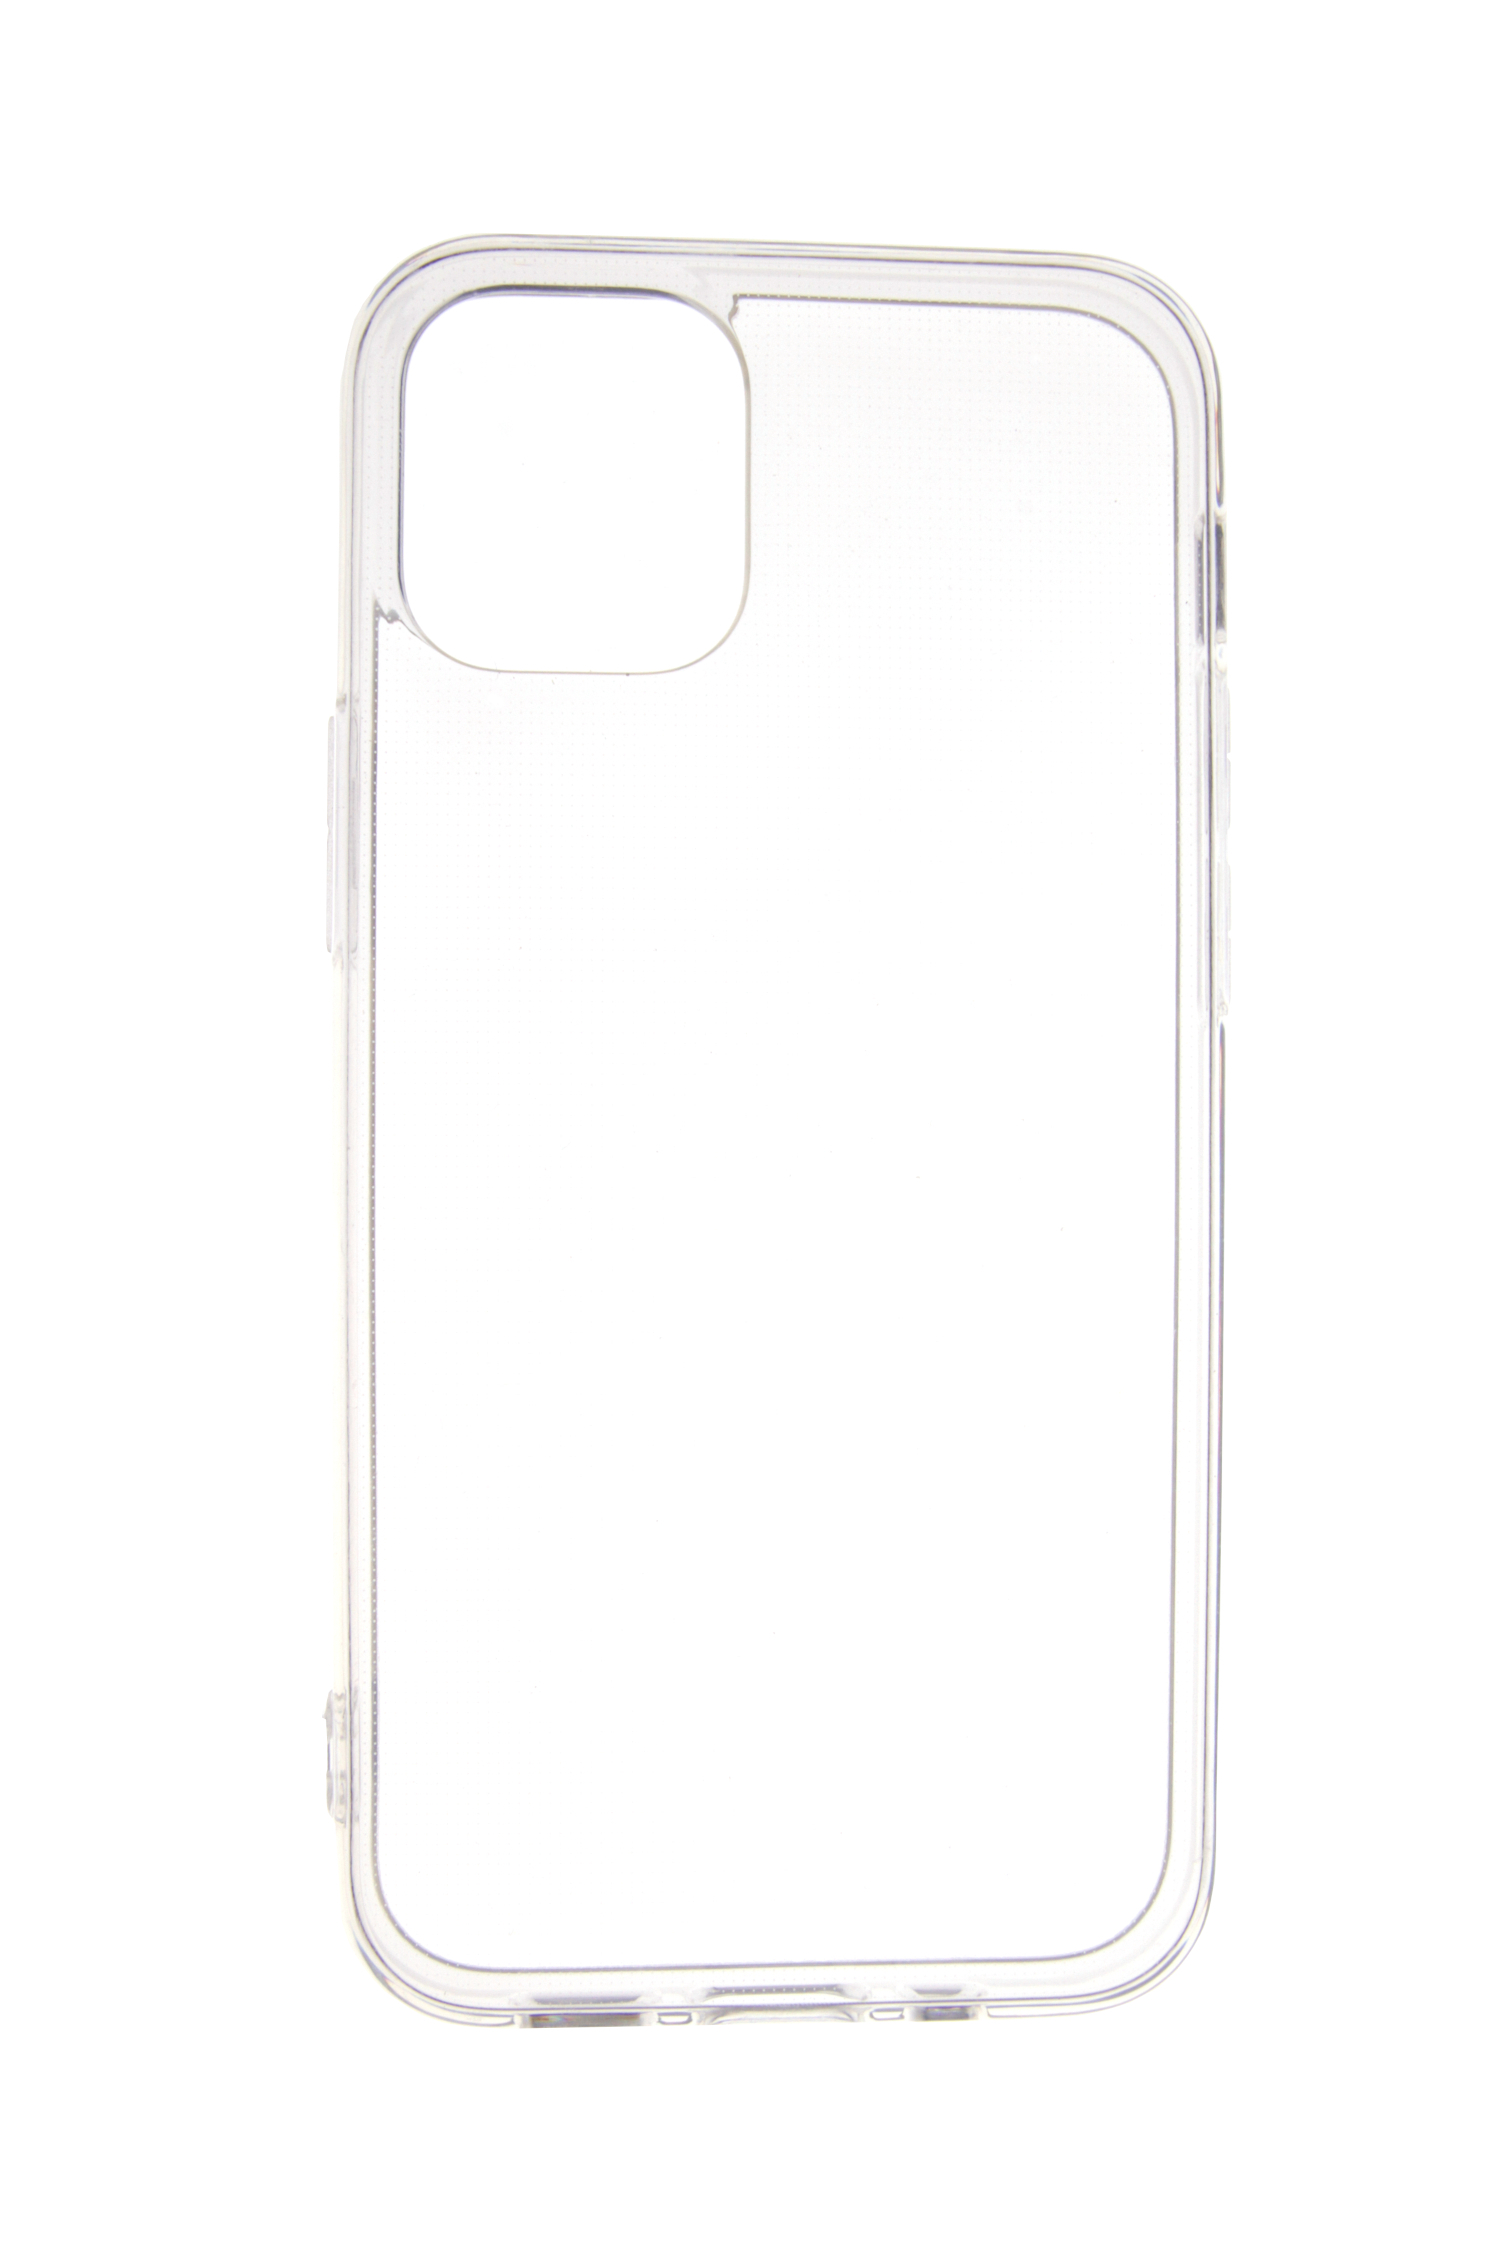 JAMCOVER 1.8 mm TPU 12 Pro, iPhone Backcover, Apple, / Transparent iPhone Case, 12